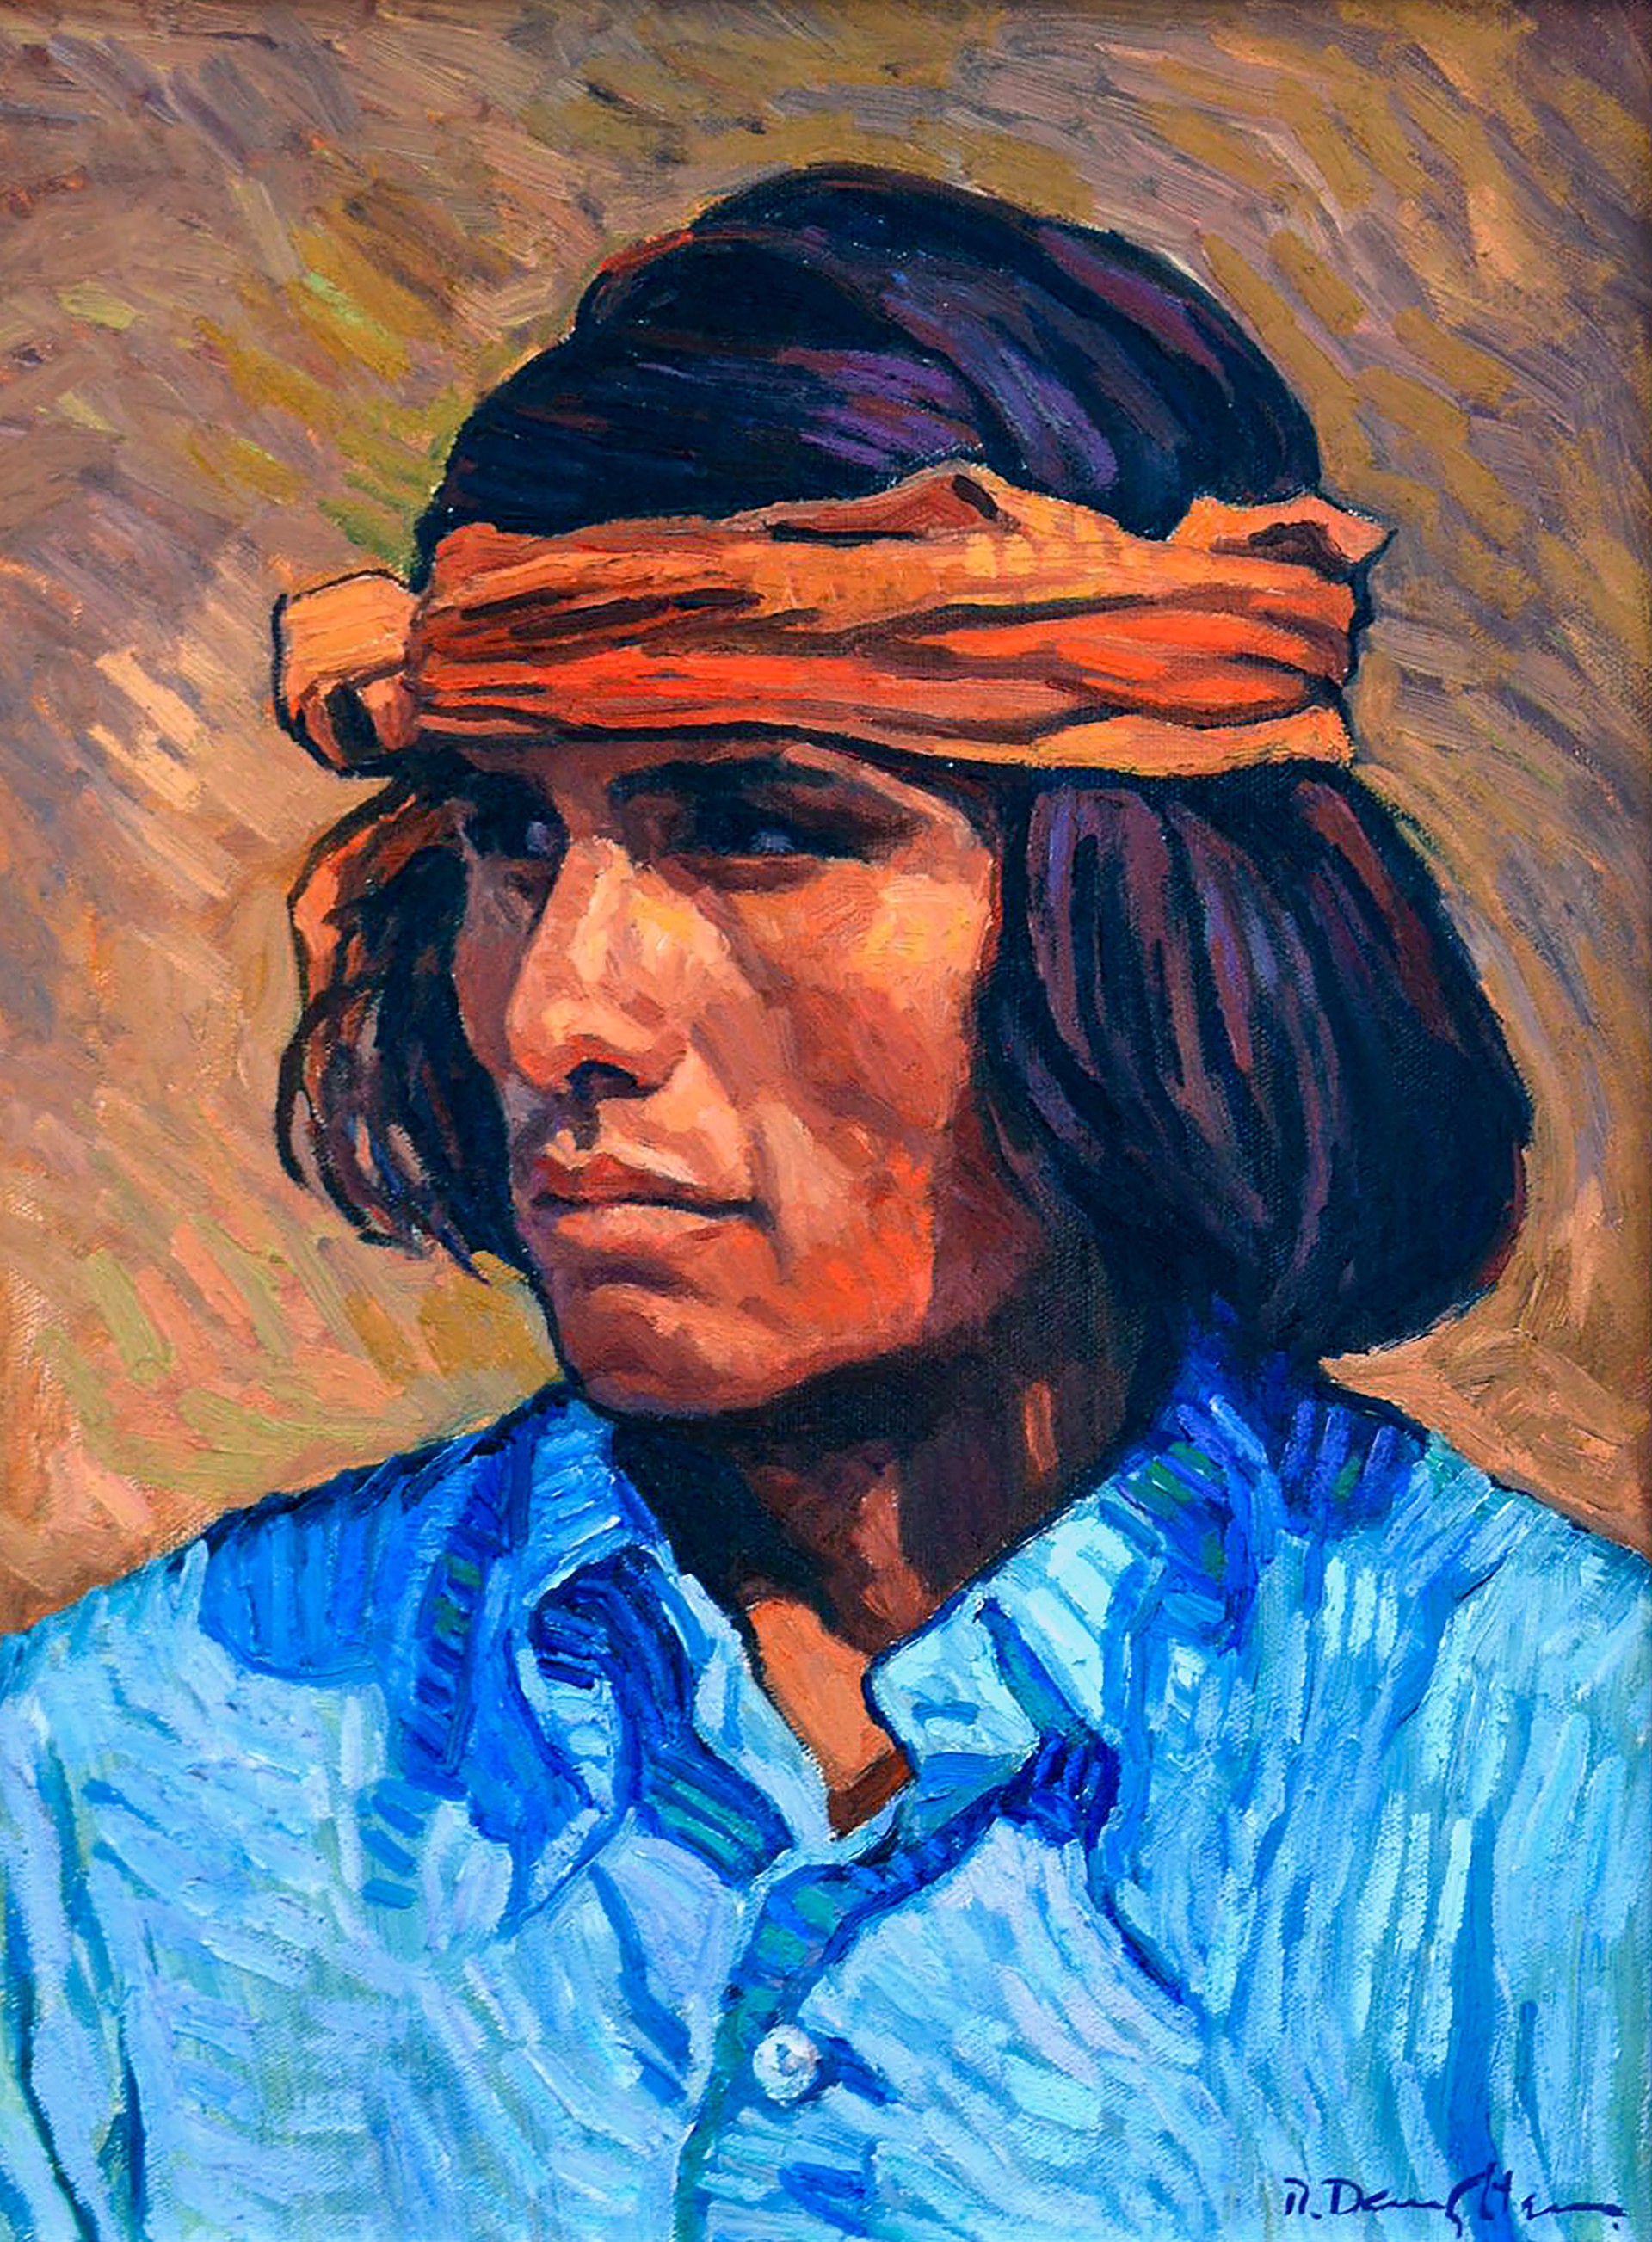 Indian Boy by Robert Daughters (1929-2013)